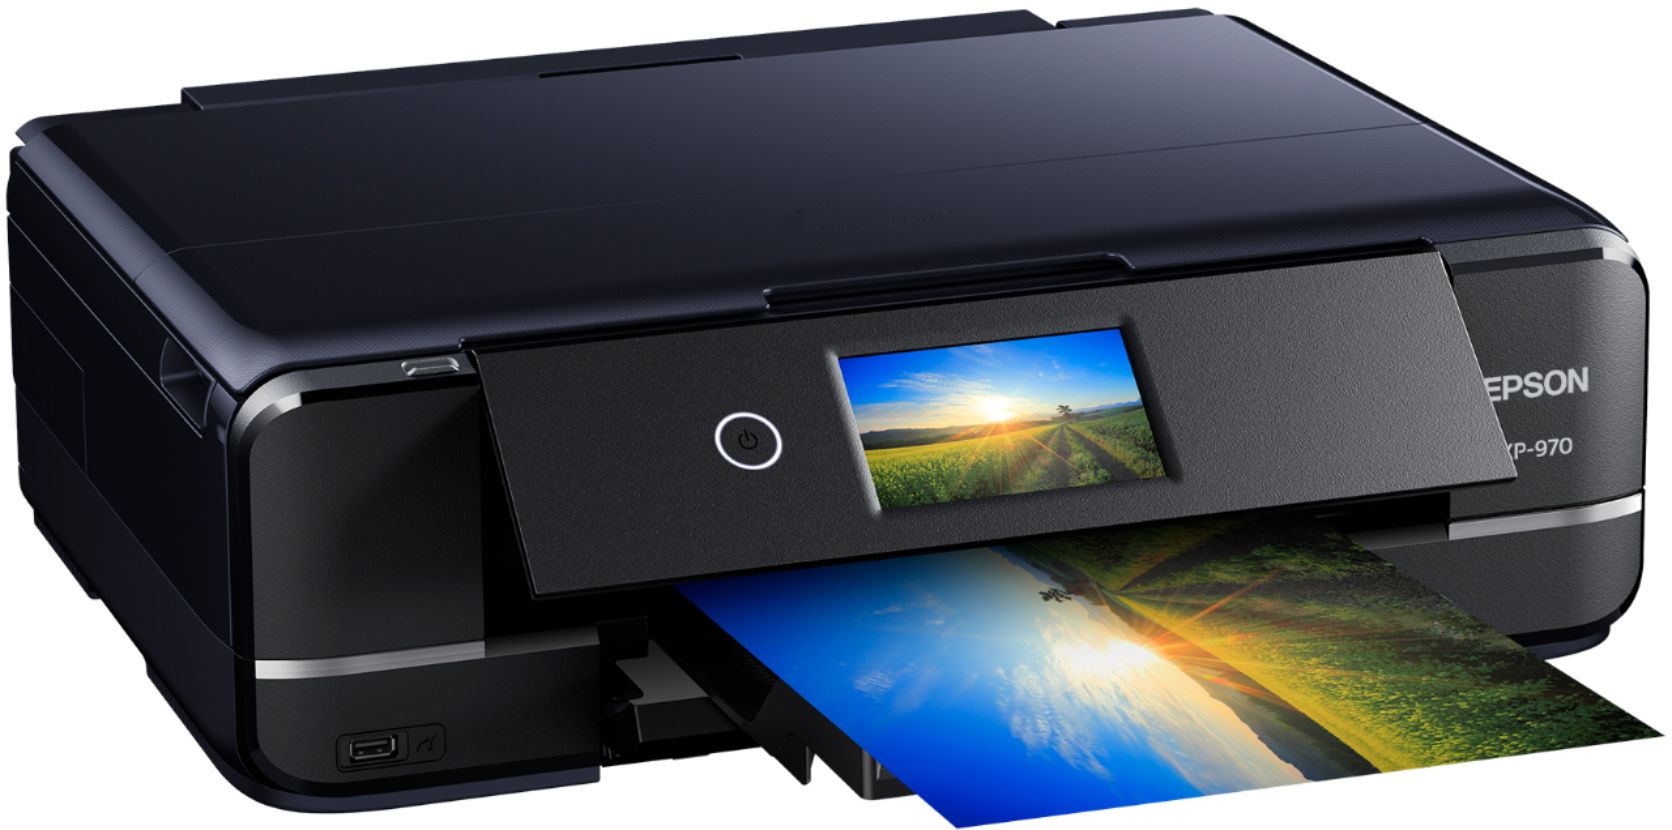 Epson Website Download Drivers For Xp-970 Windows 7 / Free Download Driver Epson Ds 530 Scanner Scanner Software Downloads